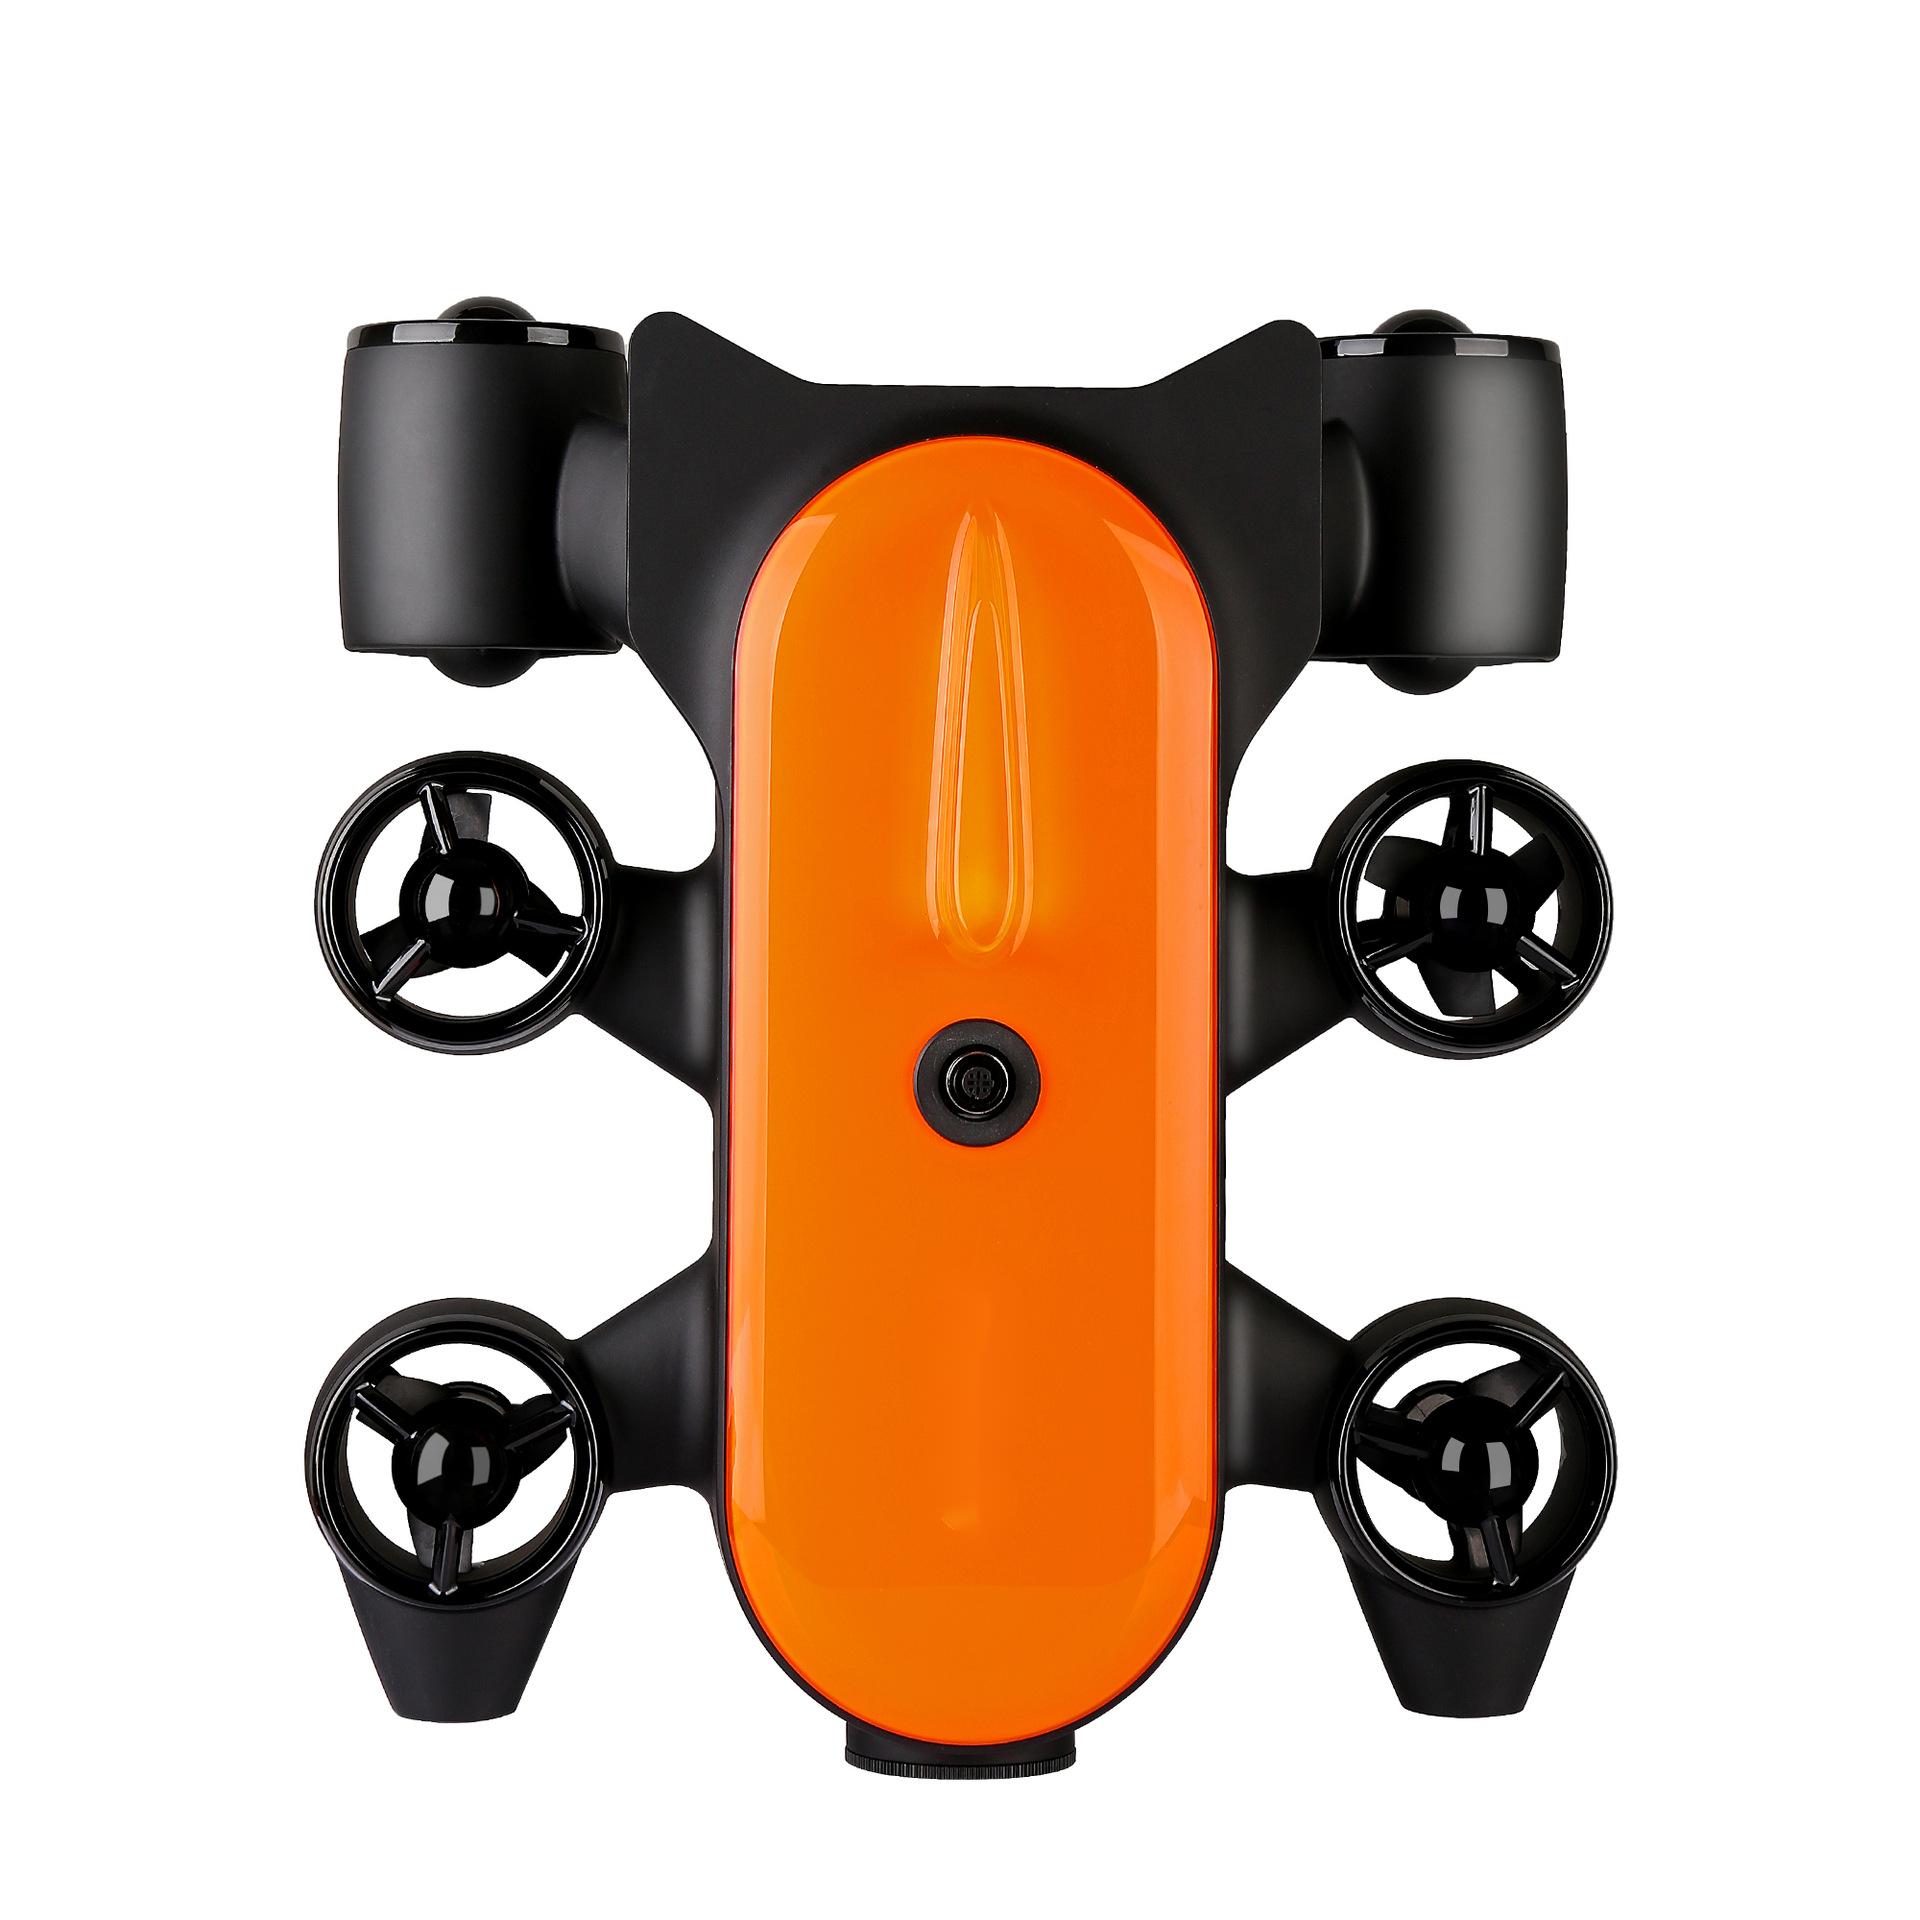 UAV underwater robot intelligent 4K camera diving shooting search and rescue